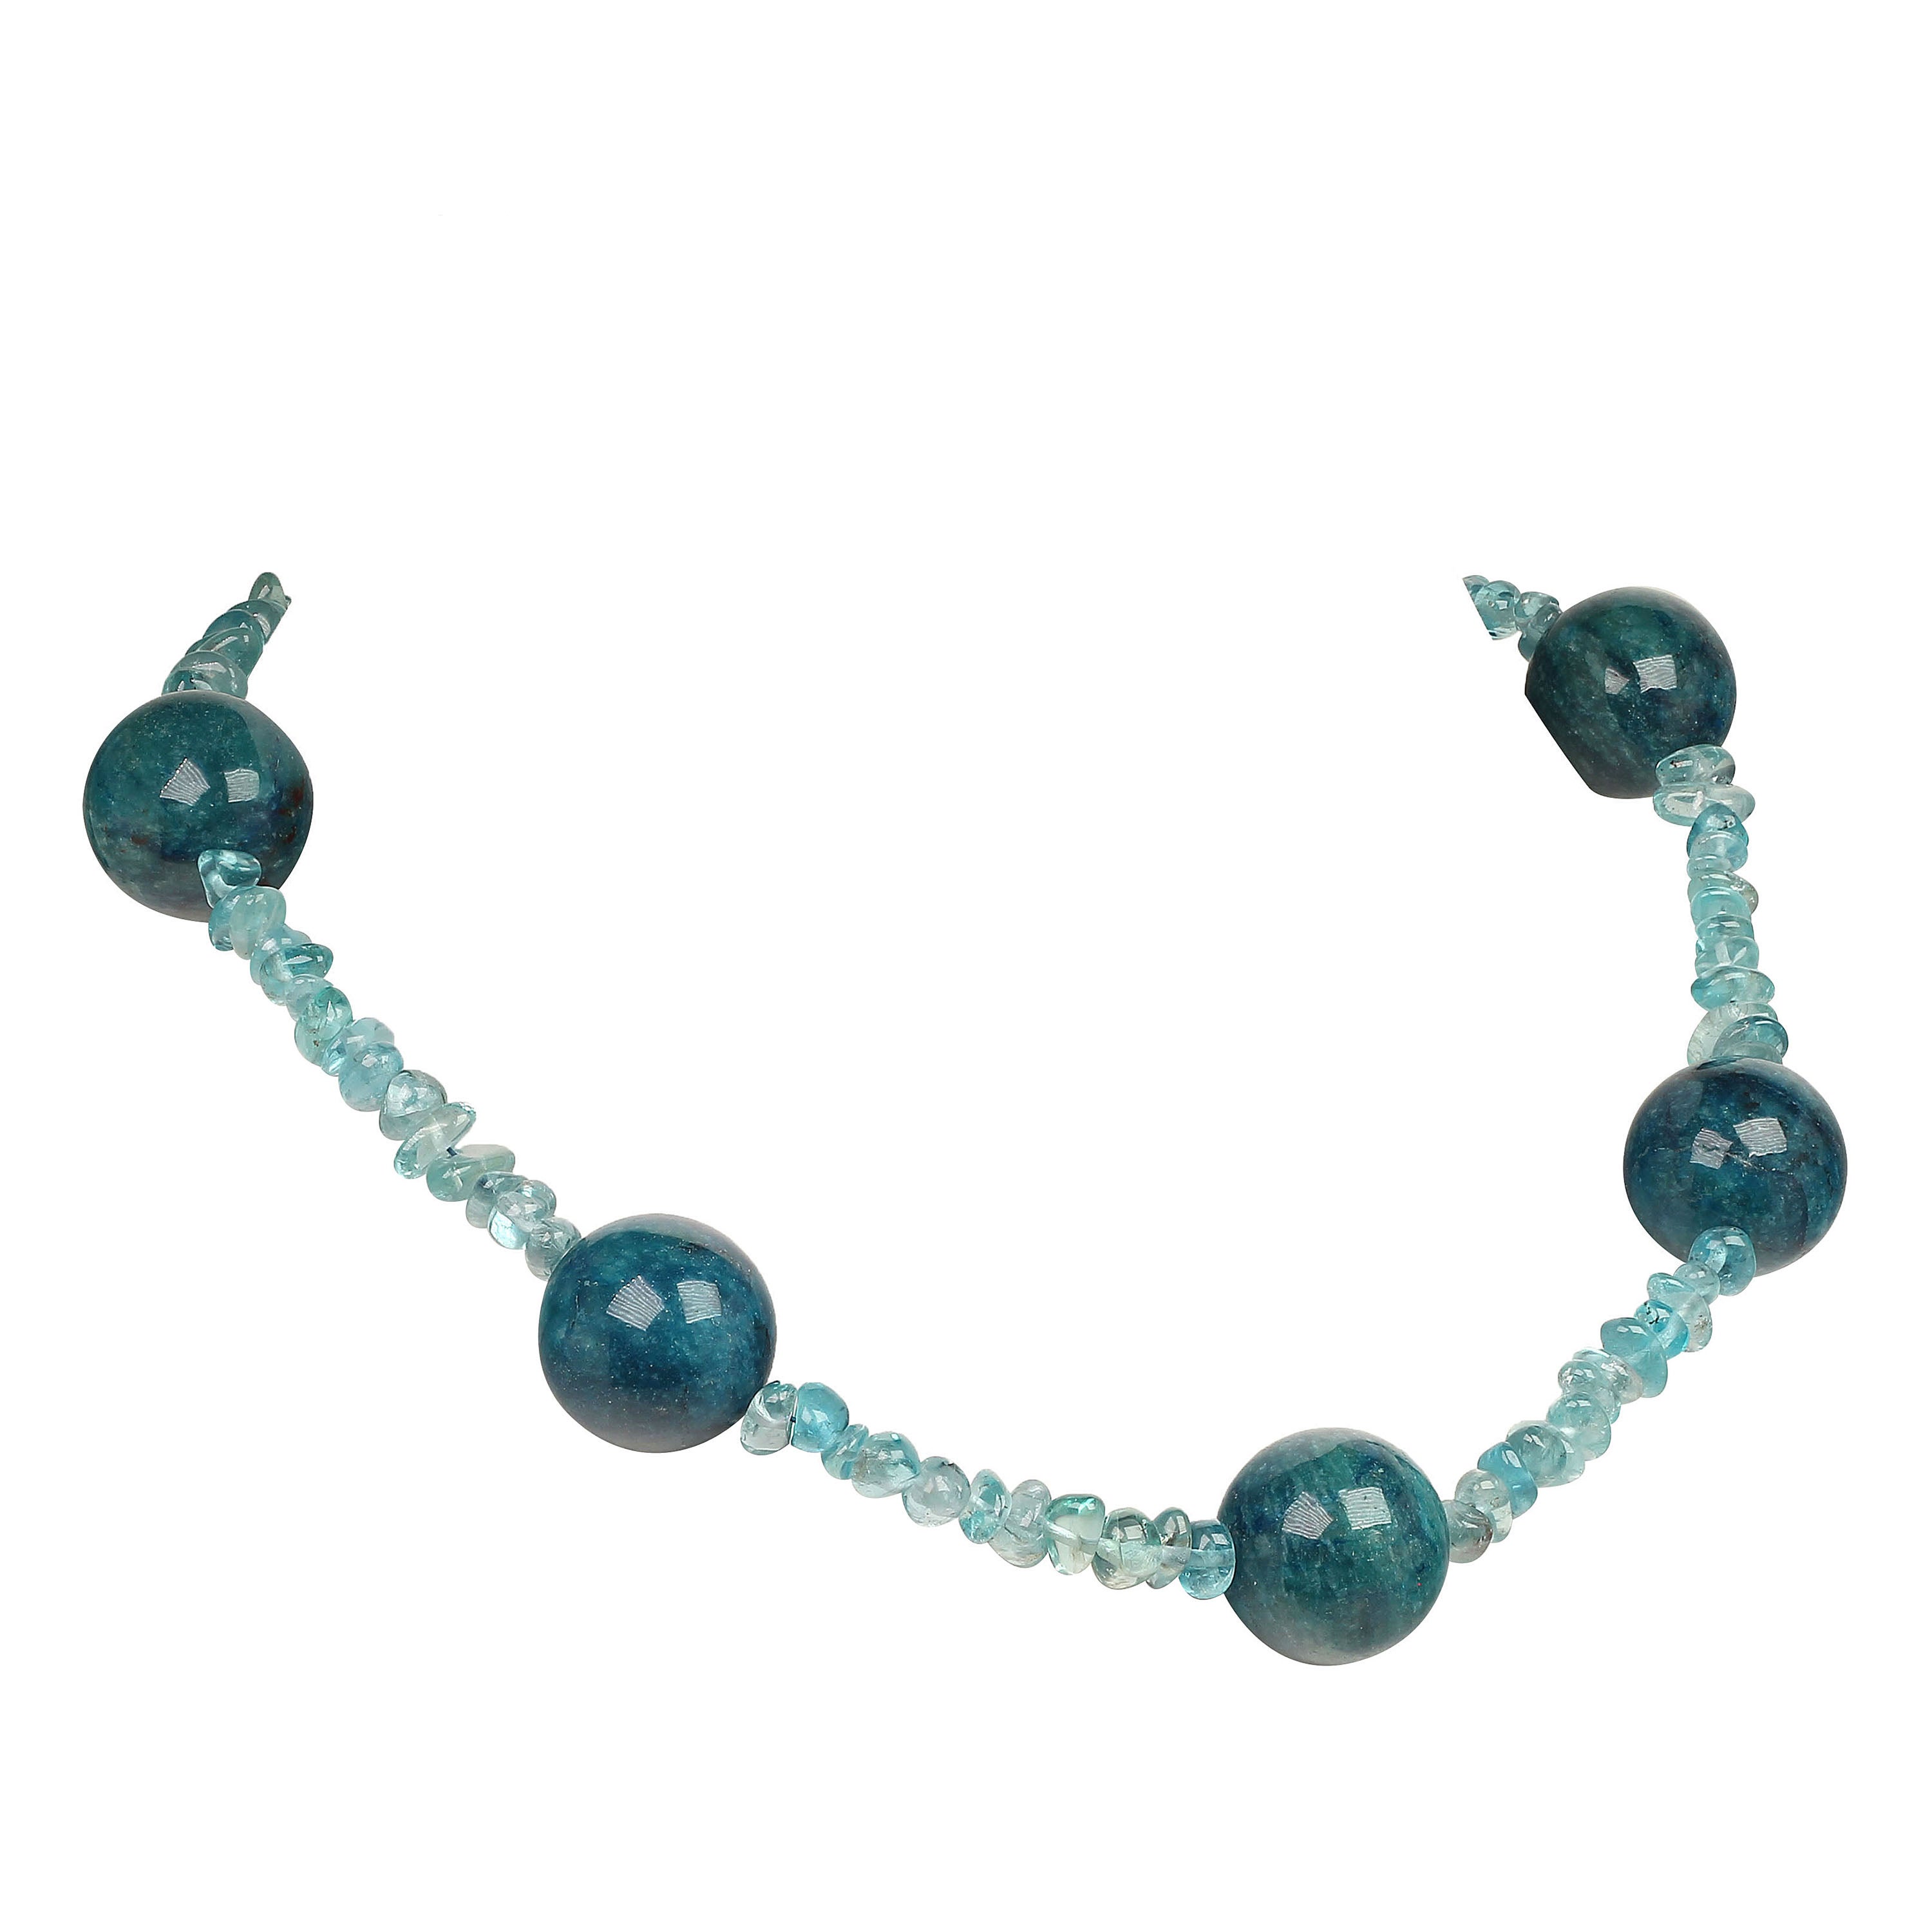 Stunnning, handmade necklace of five 20MM spheres of Apatite spaced out along highly polished, tumbled transparent Apatite. The 18 inch length of this necklace makes it very versatile. This unique necklace is secured with a hammered 24K yellow gold